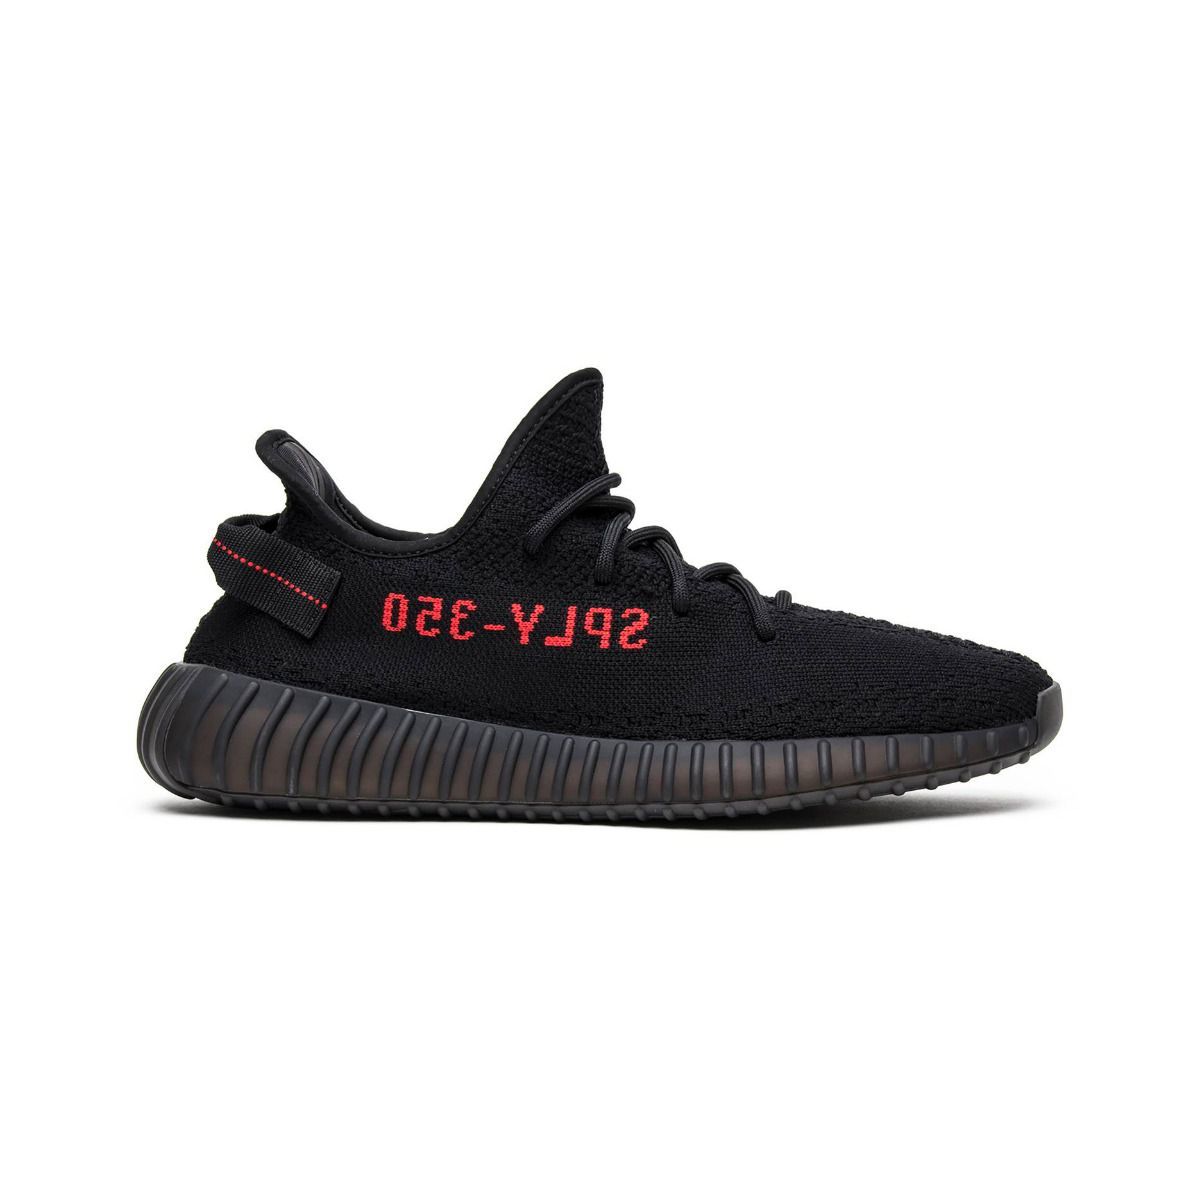 Cheap Adidas Yeezy Boost 350 V2 Light Gy3438 Kanye West Size 6